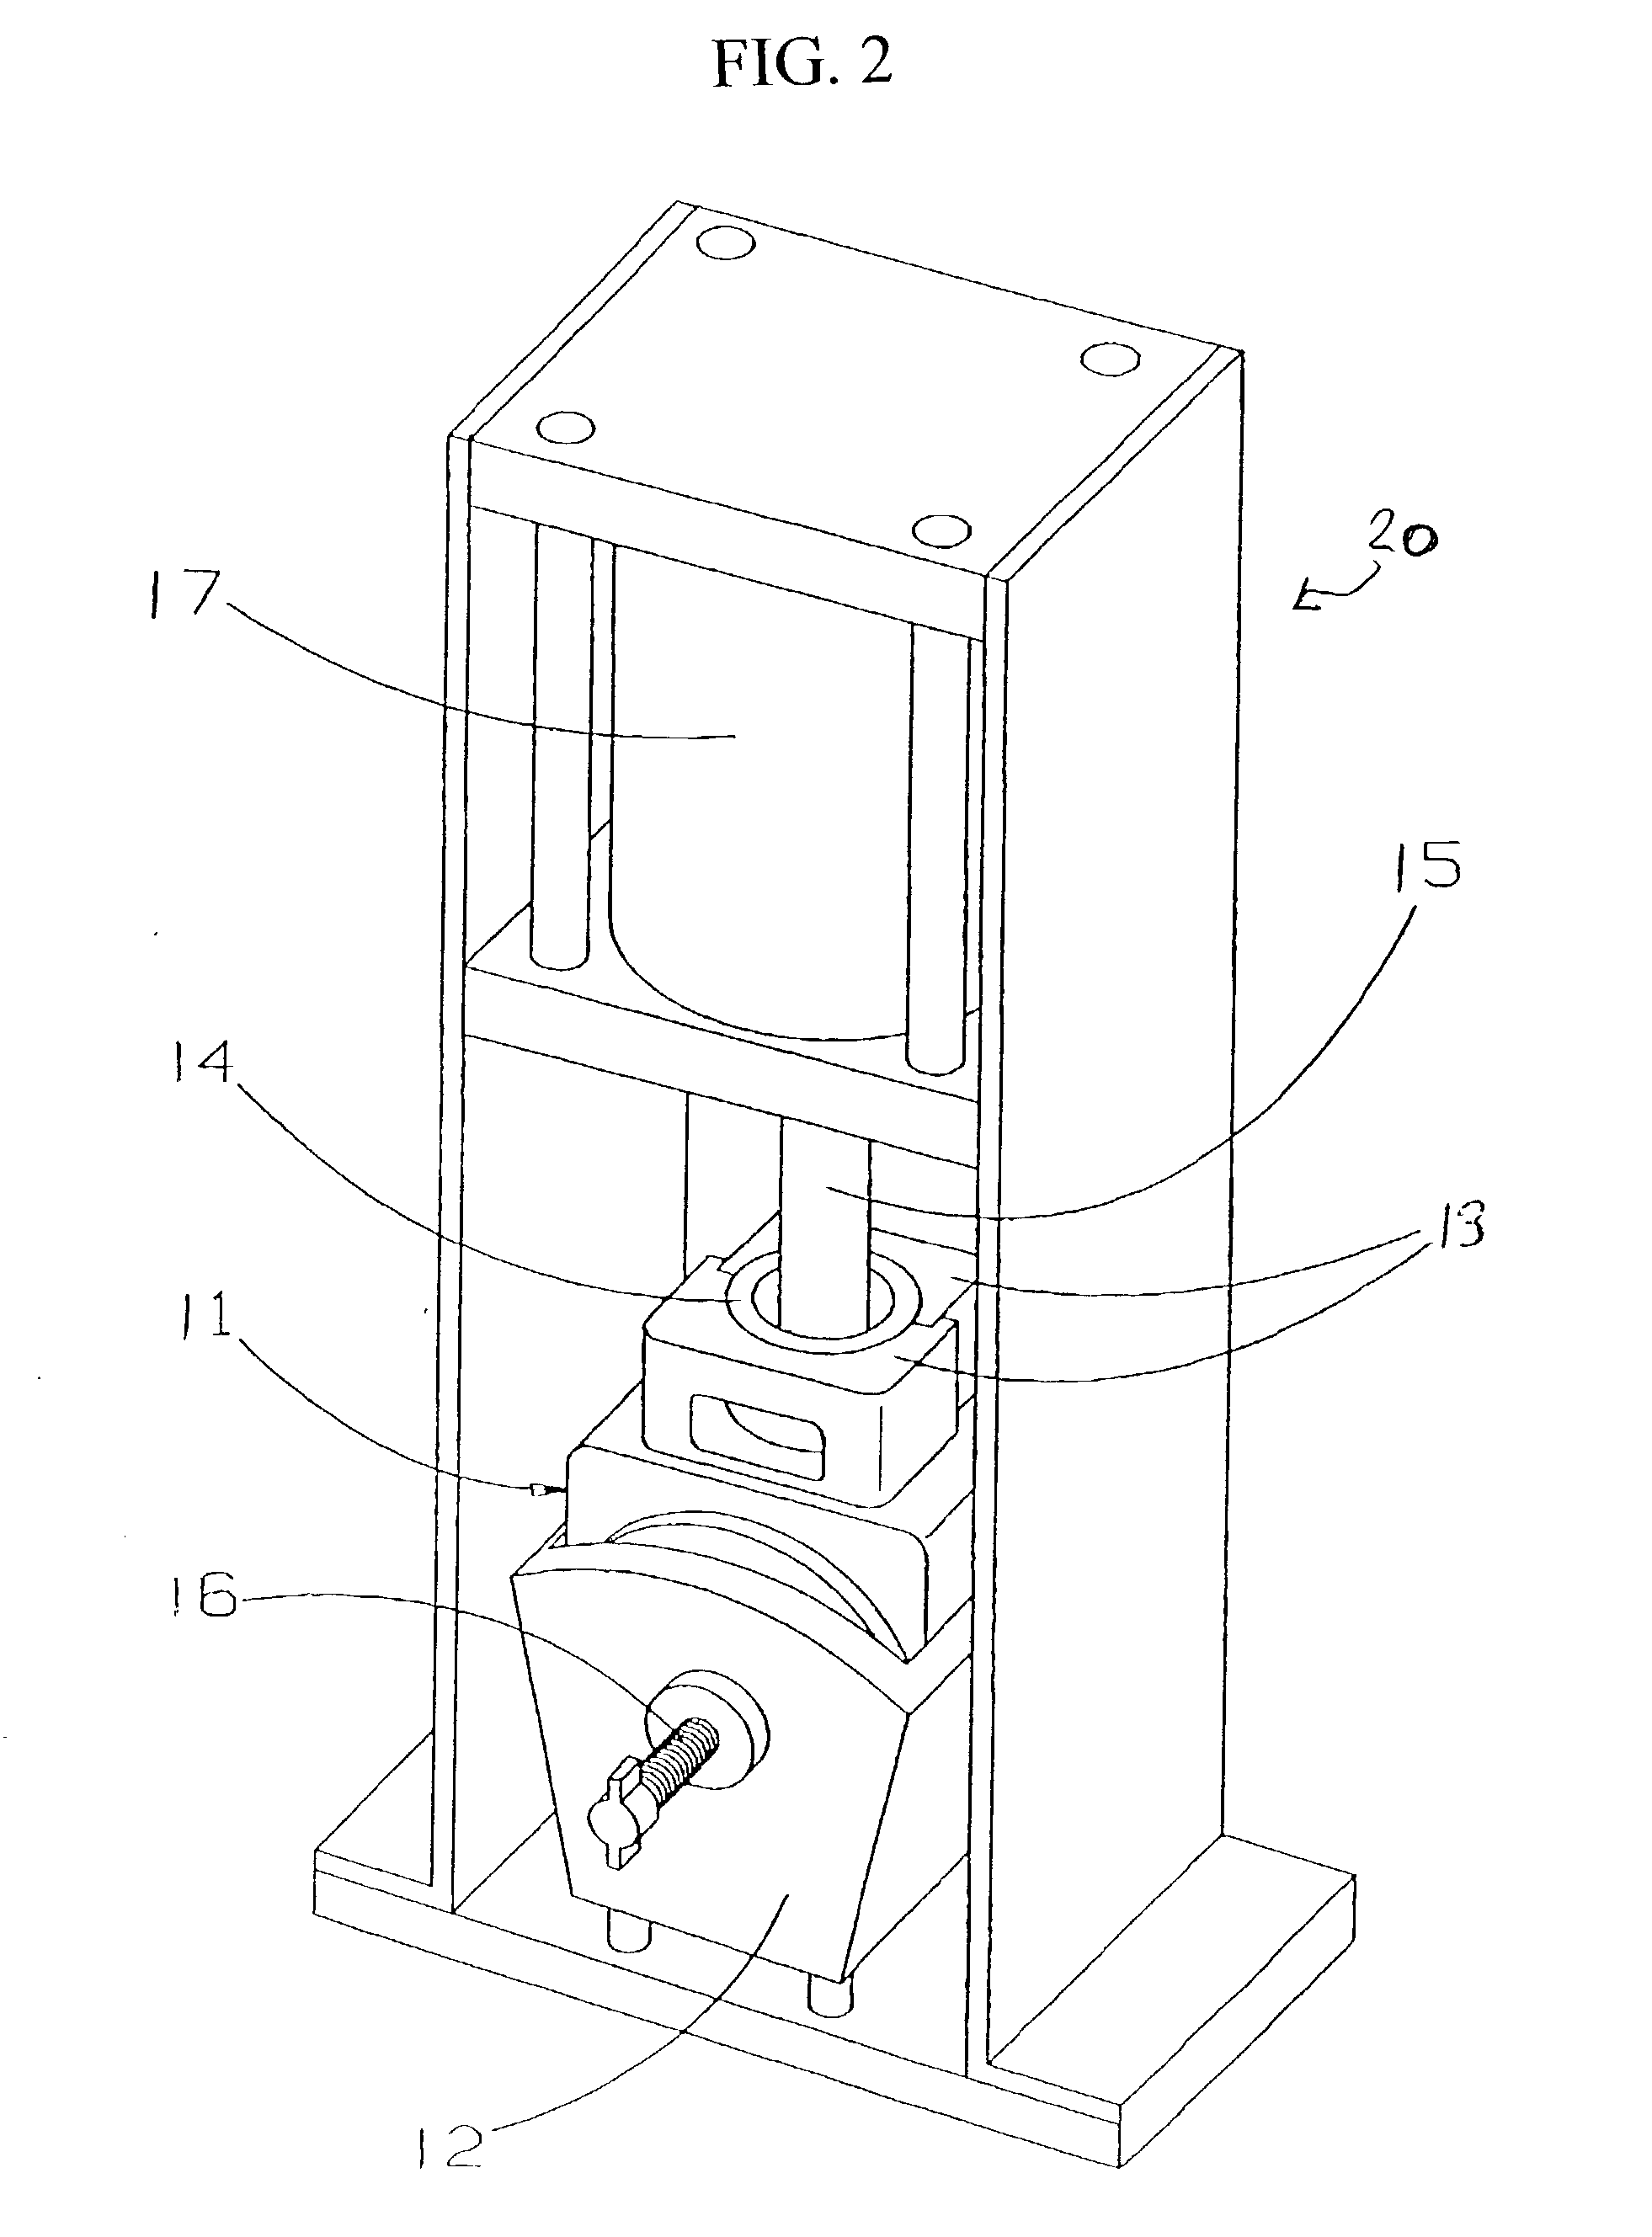 Process for converting a device for the production of acrylic resin dental prostheses to use acetal and similar resins